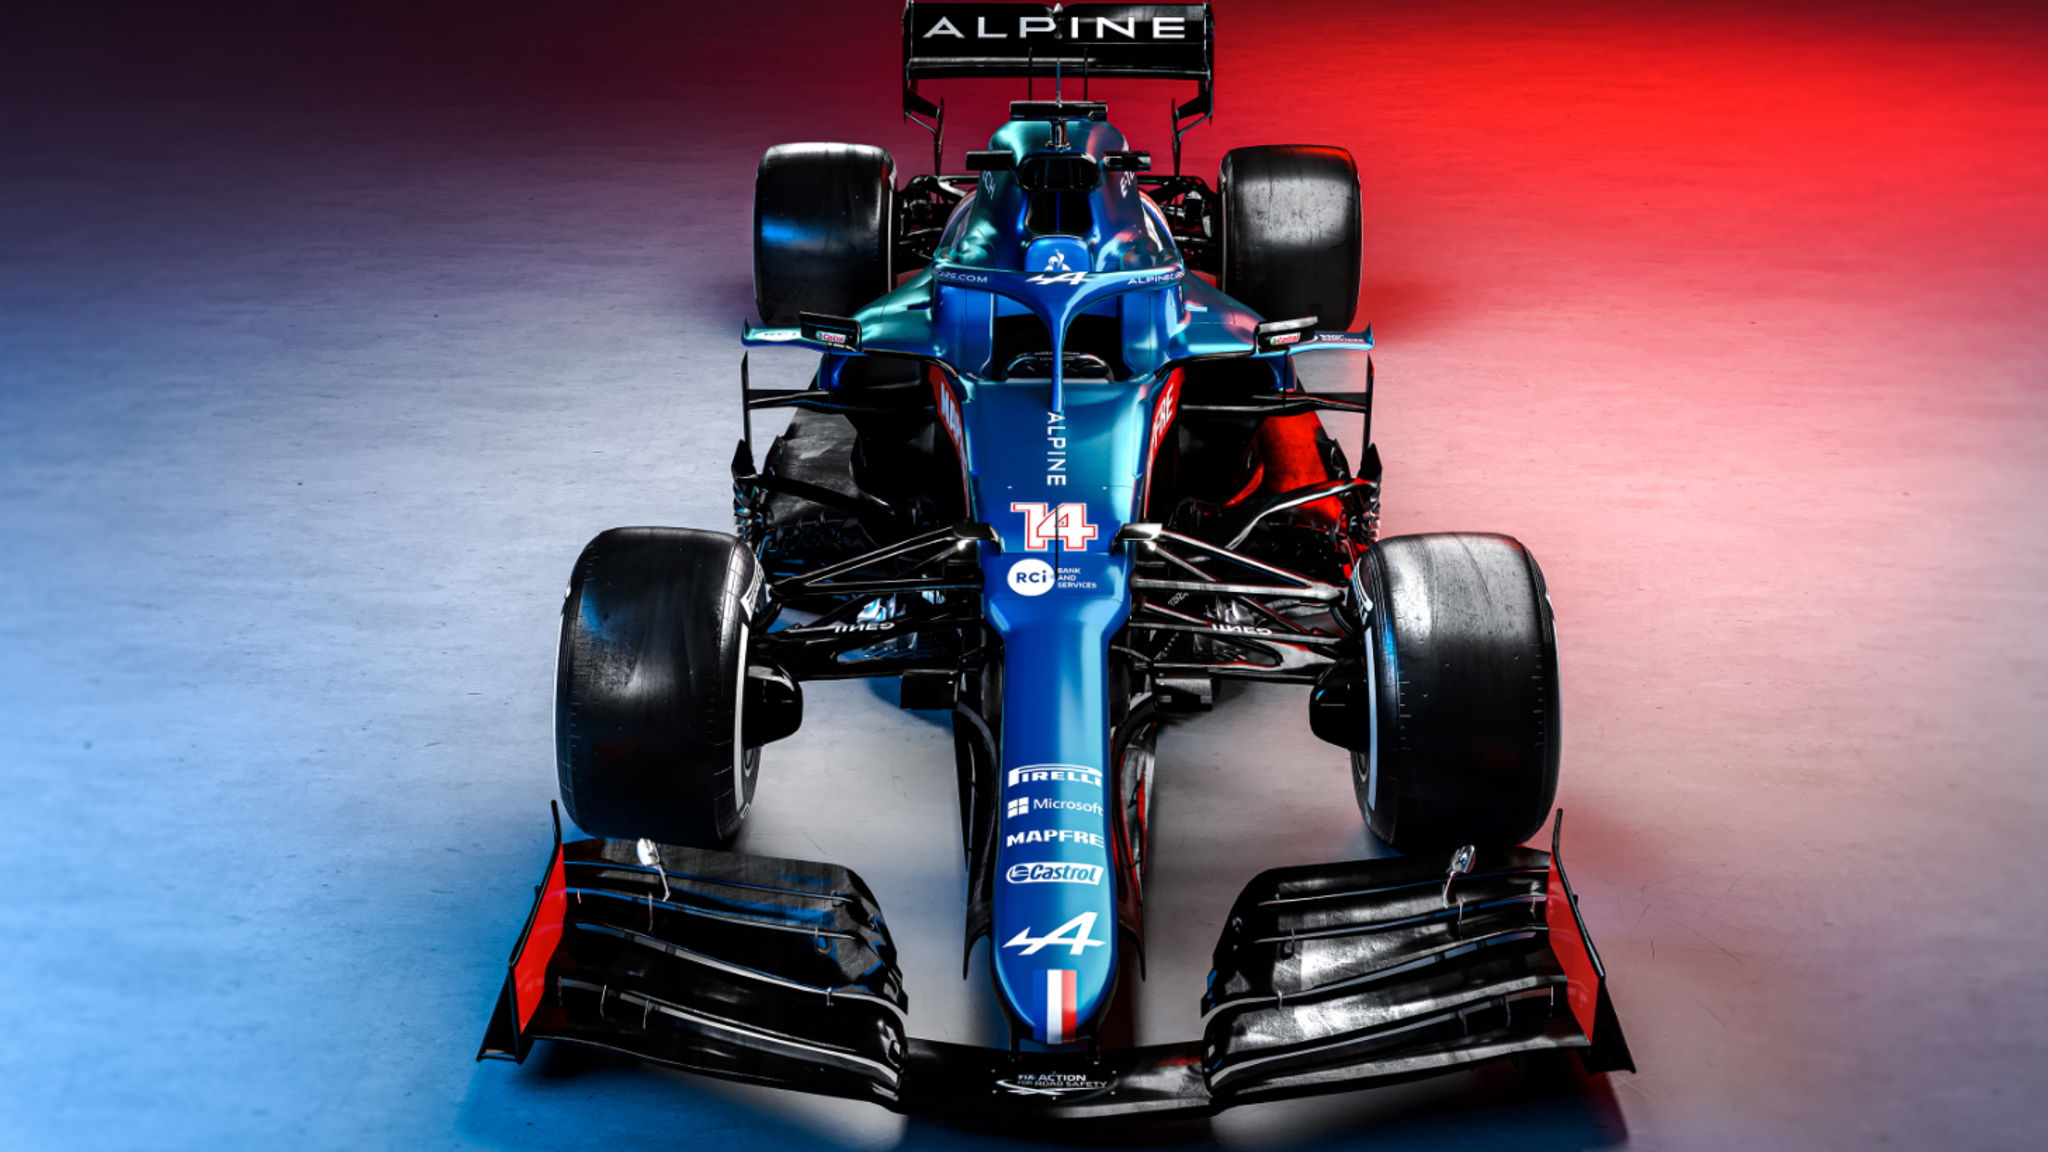 Renault reveal first look at Alpine F1 livery for 2021 rebrand, F1 News